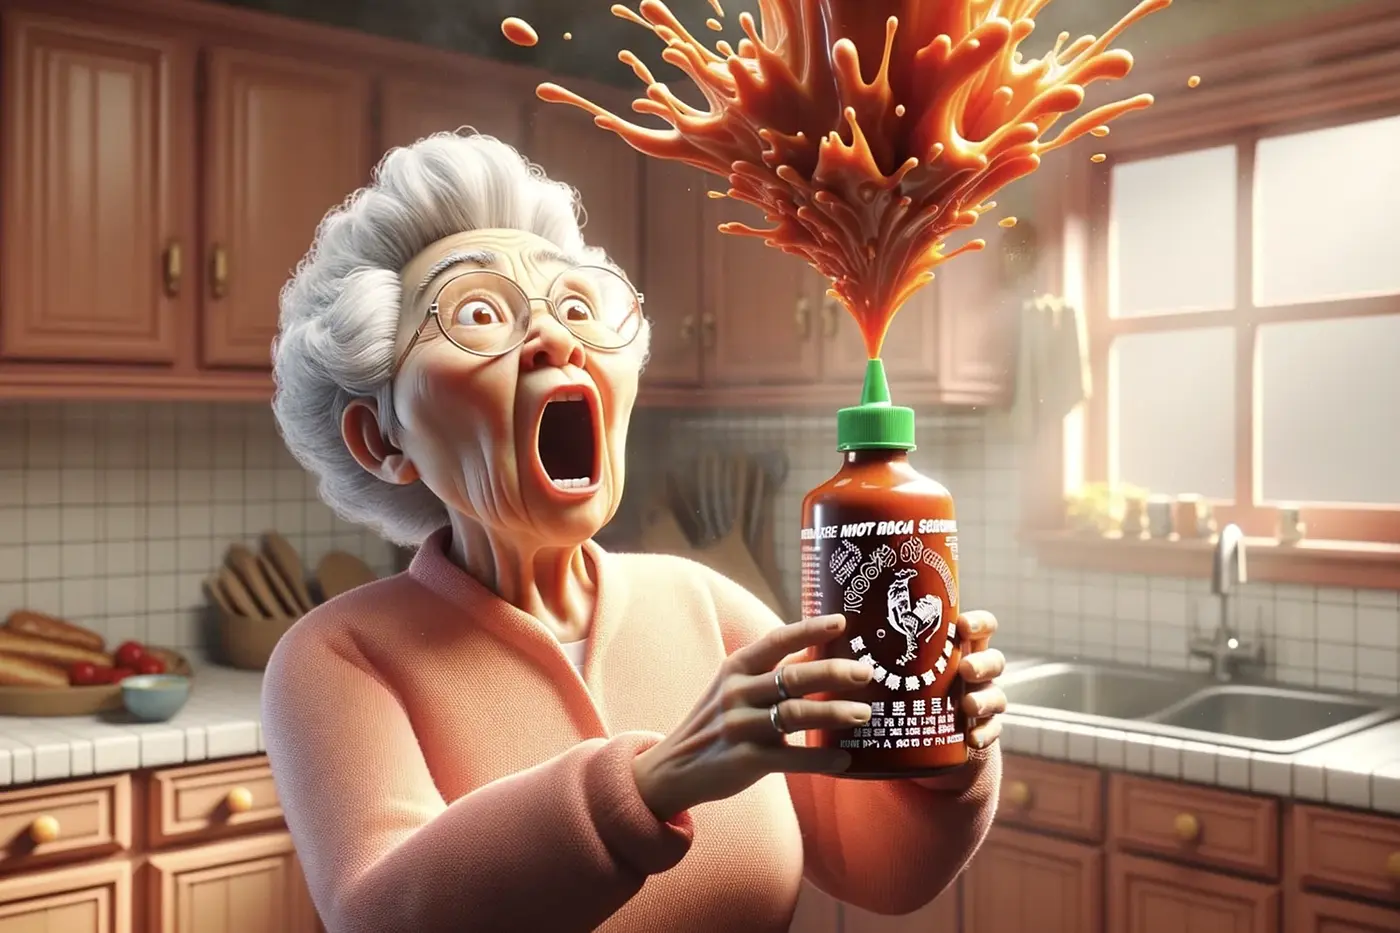 An old lady who is shocked at seeing her Sriracha bottle explode!